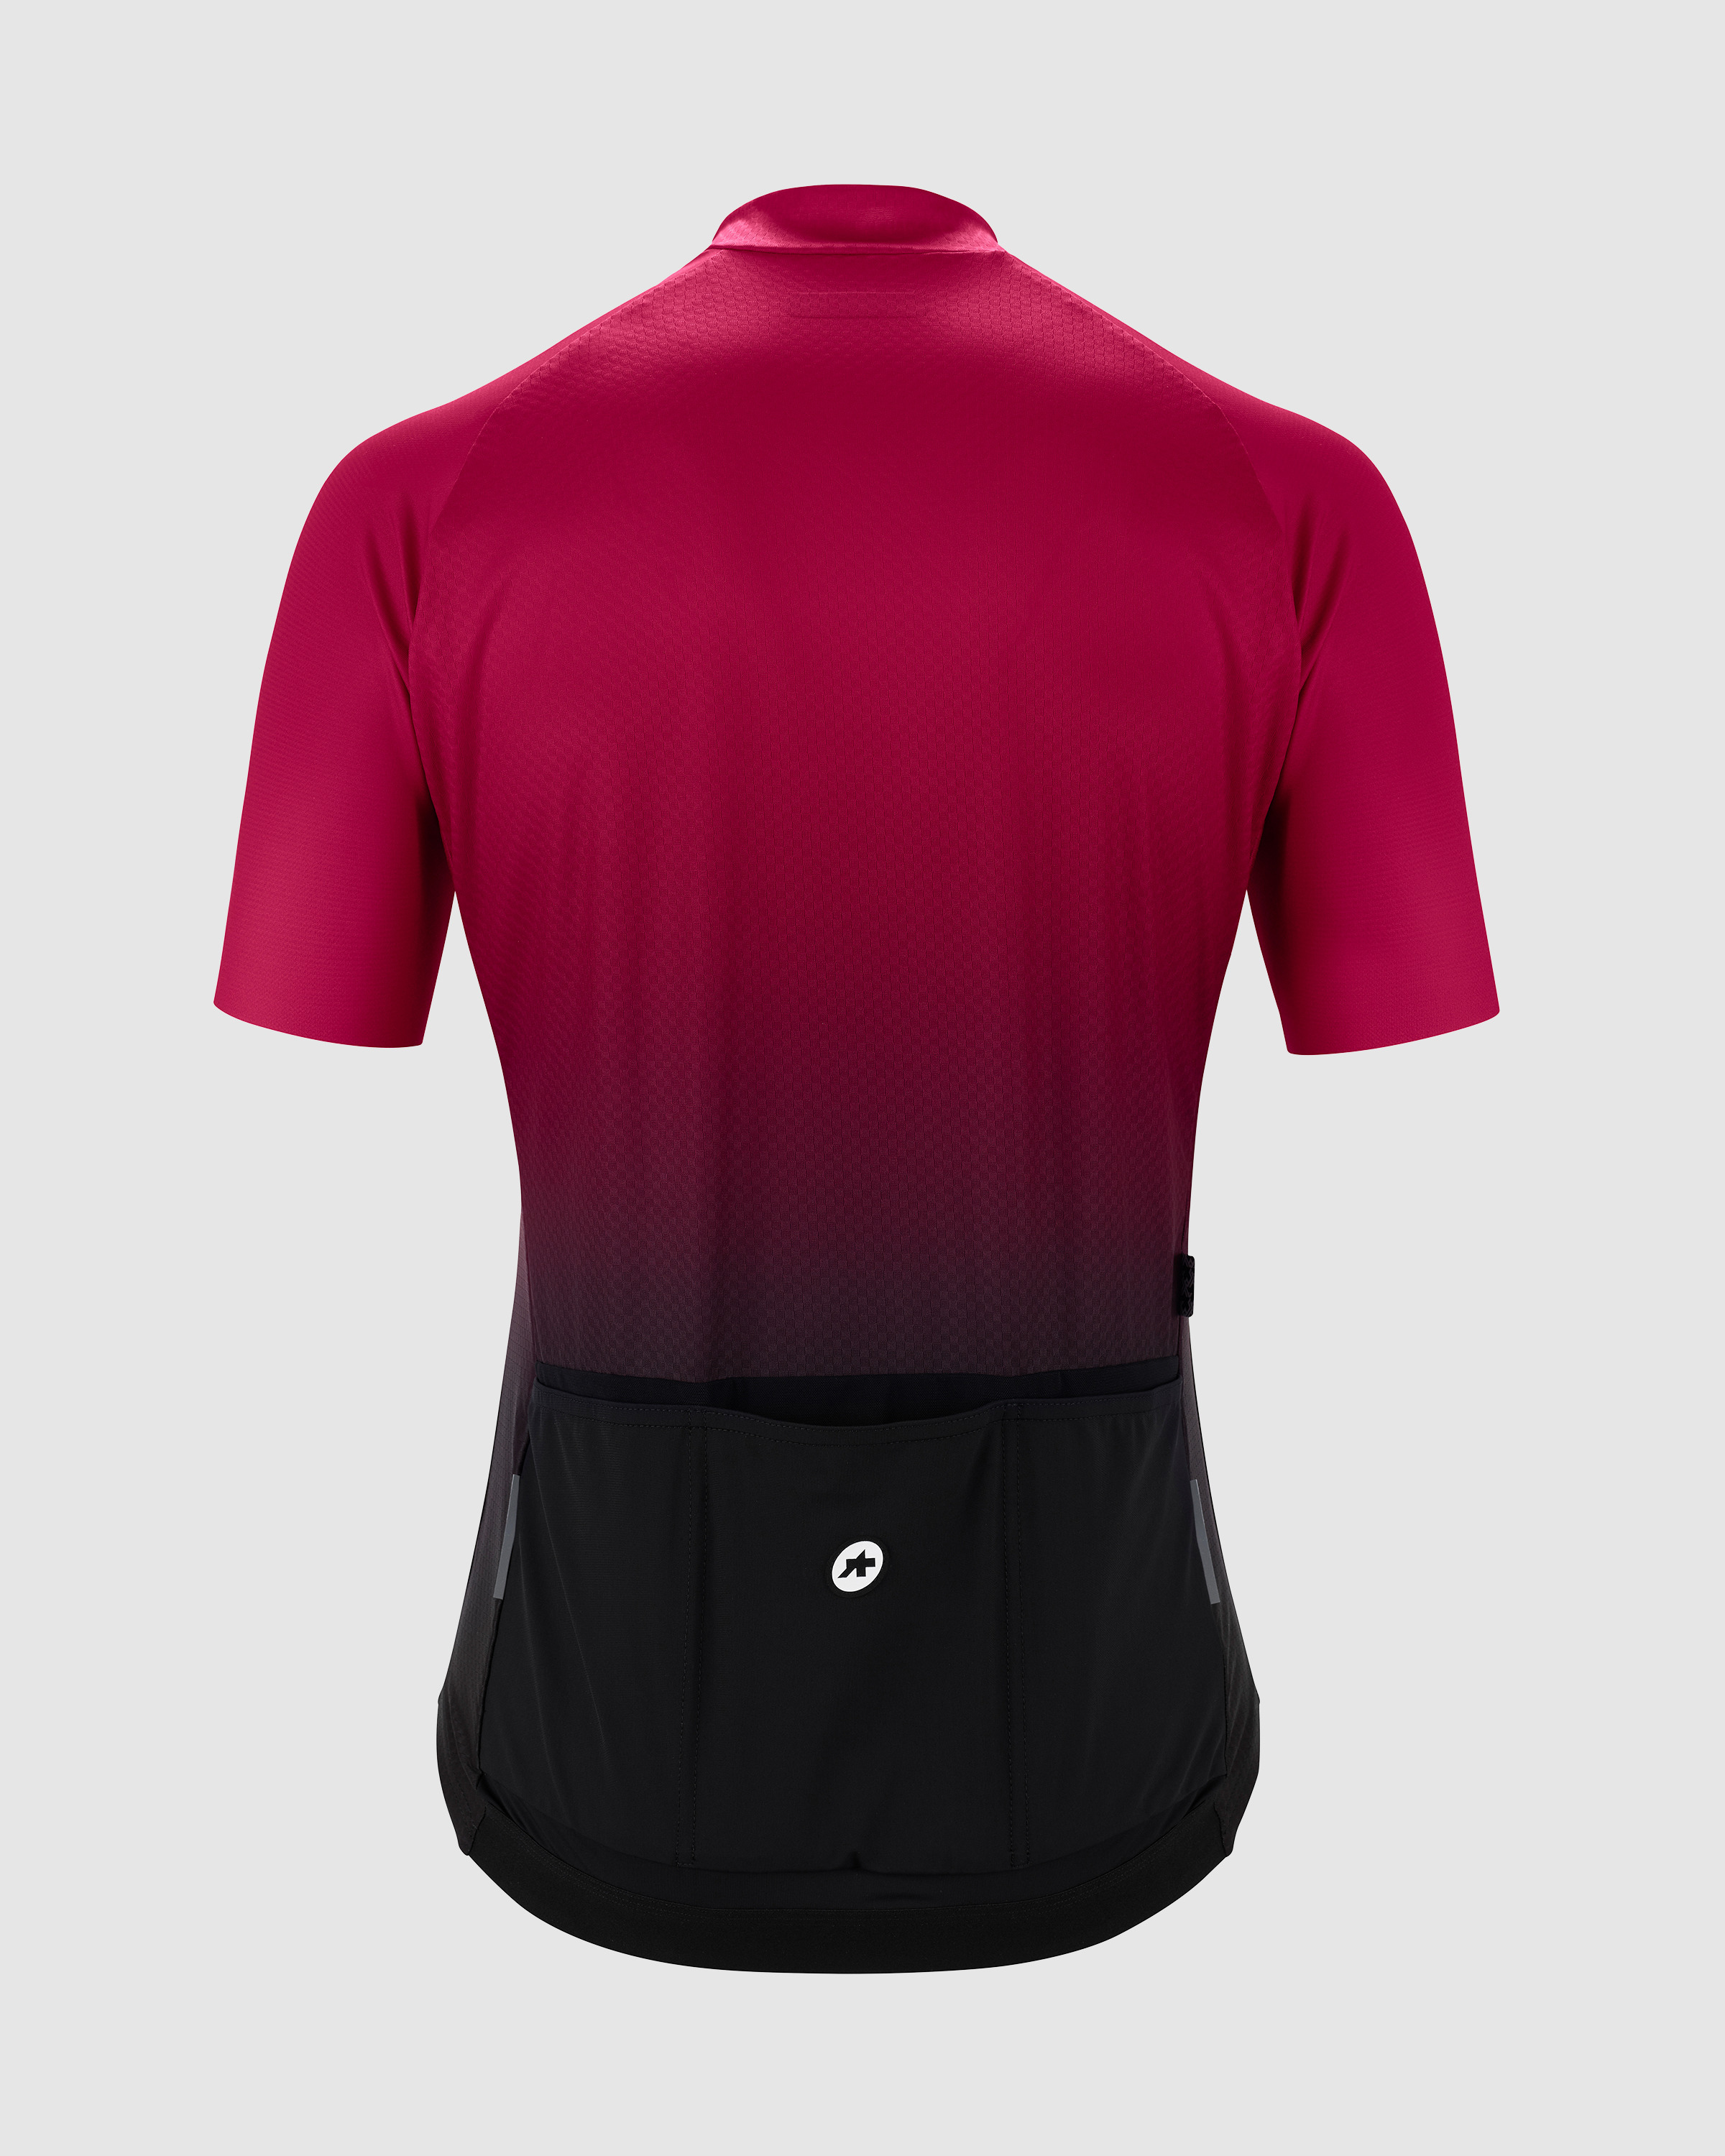 MILLE GT Jersey C2 Shifter - ASSOS Of Switzerland - Official Outlet